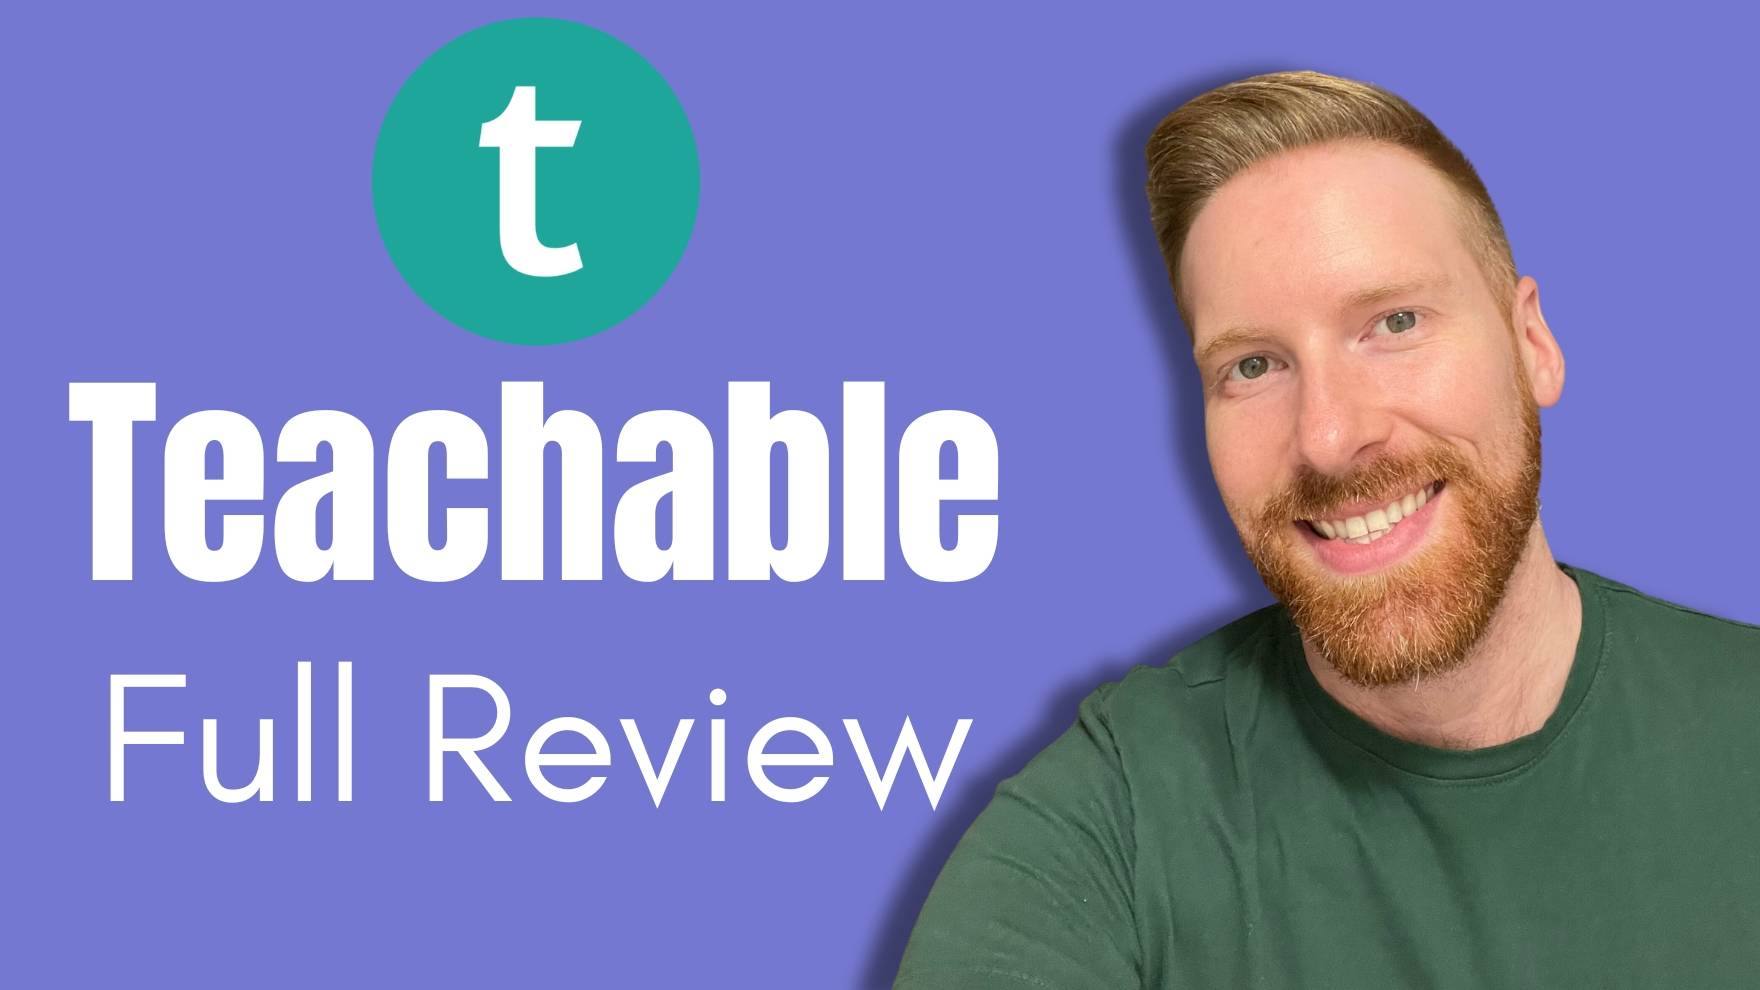 Teachable full review for creating online courses